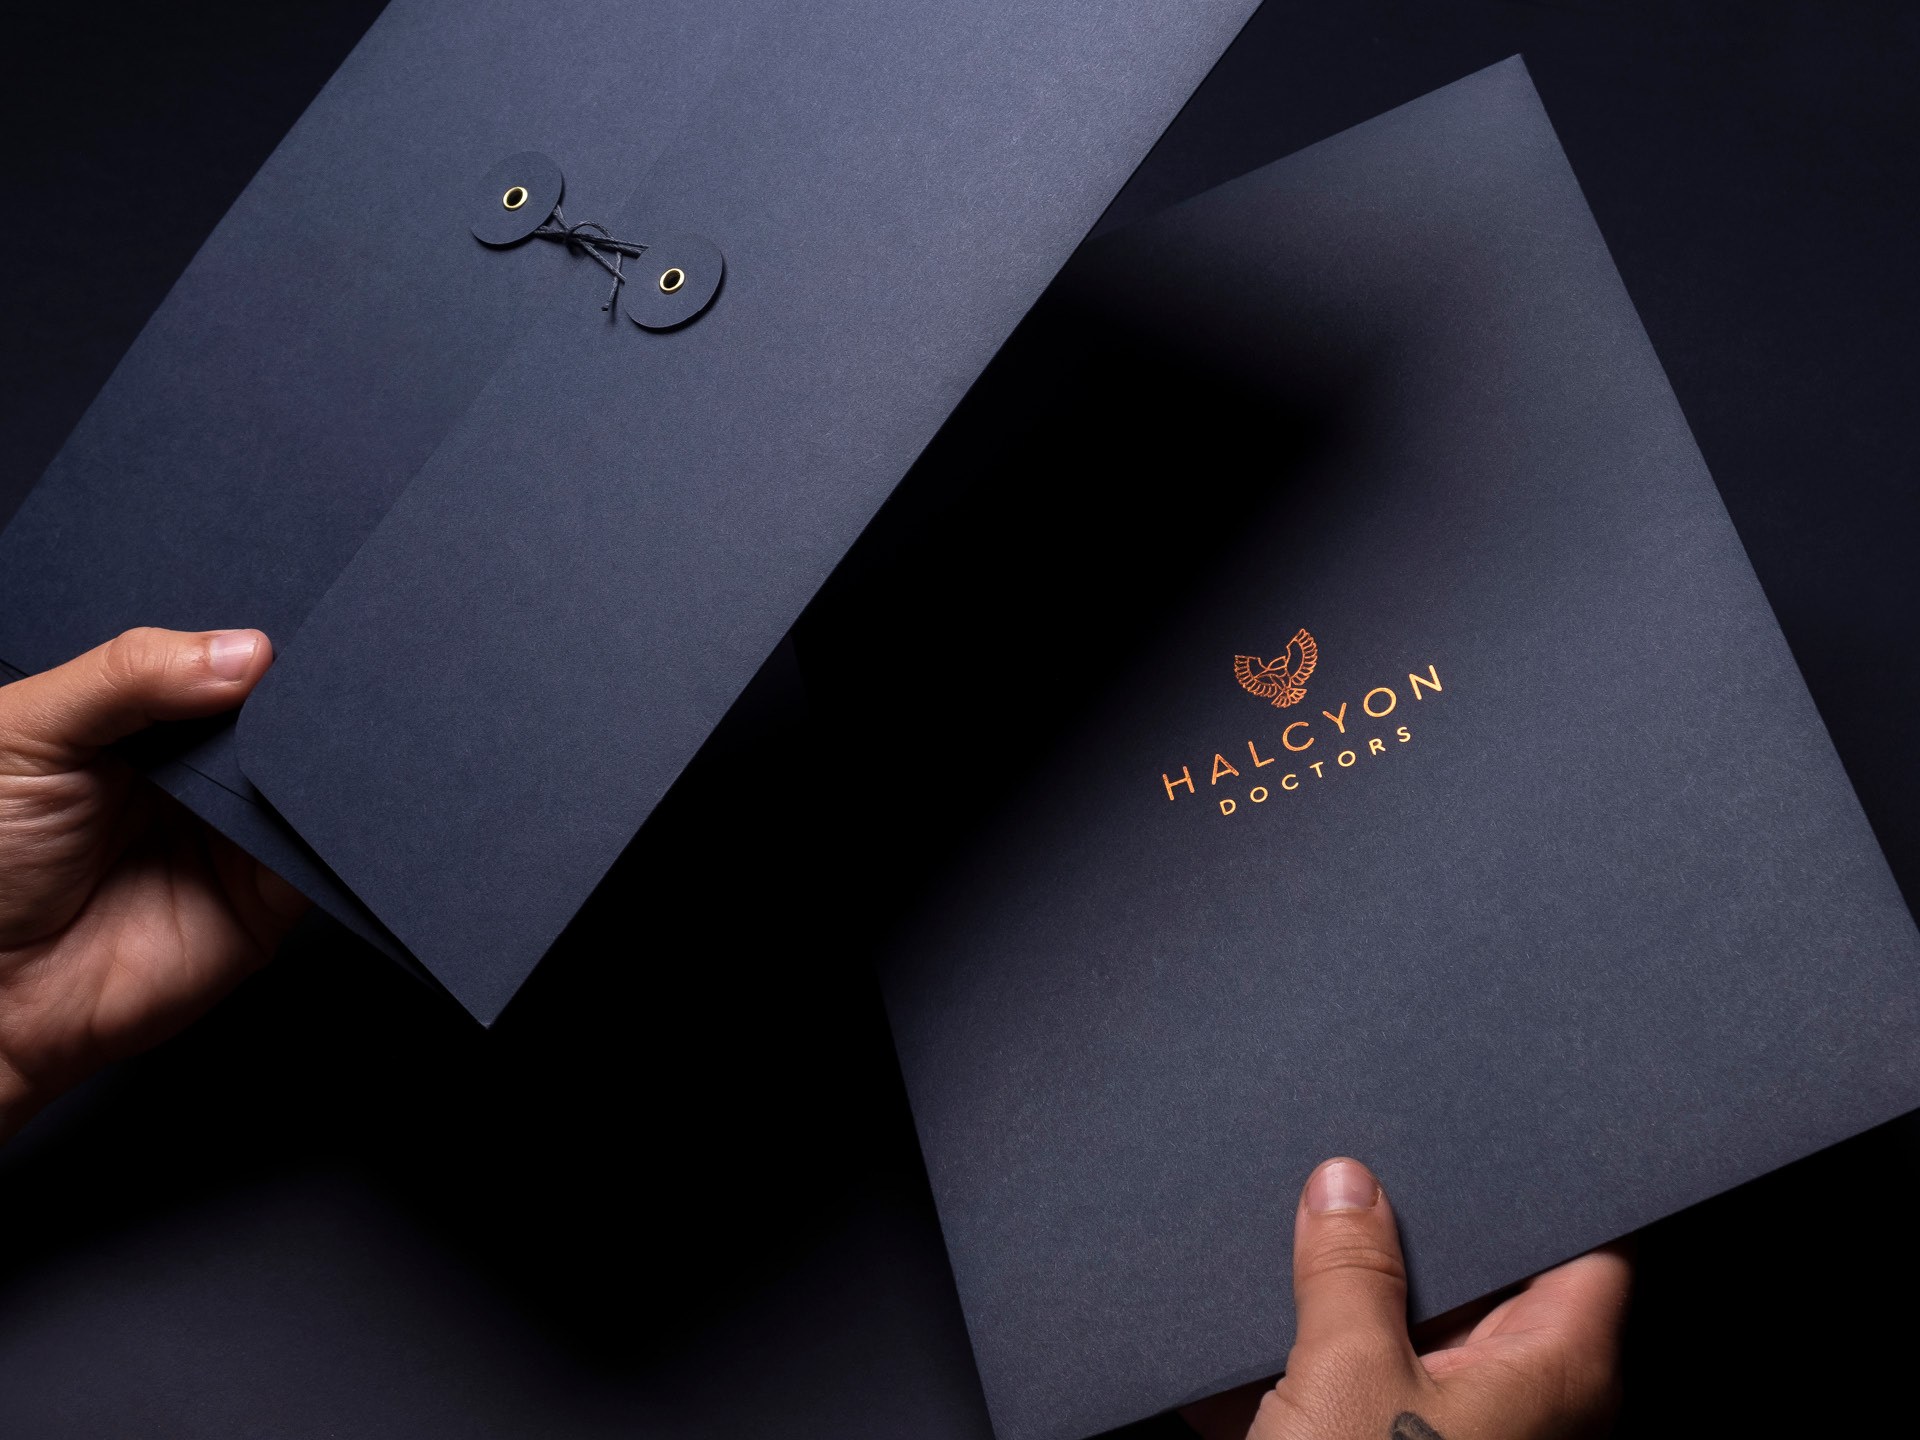 Hands holding two halcyon doctors branded folders with a string and washer binding on one side and the logo copper foiled on the other